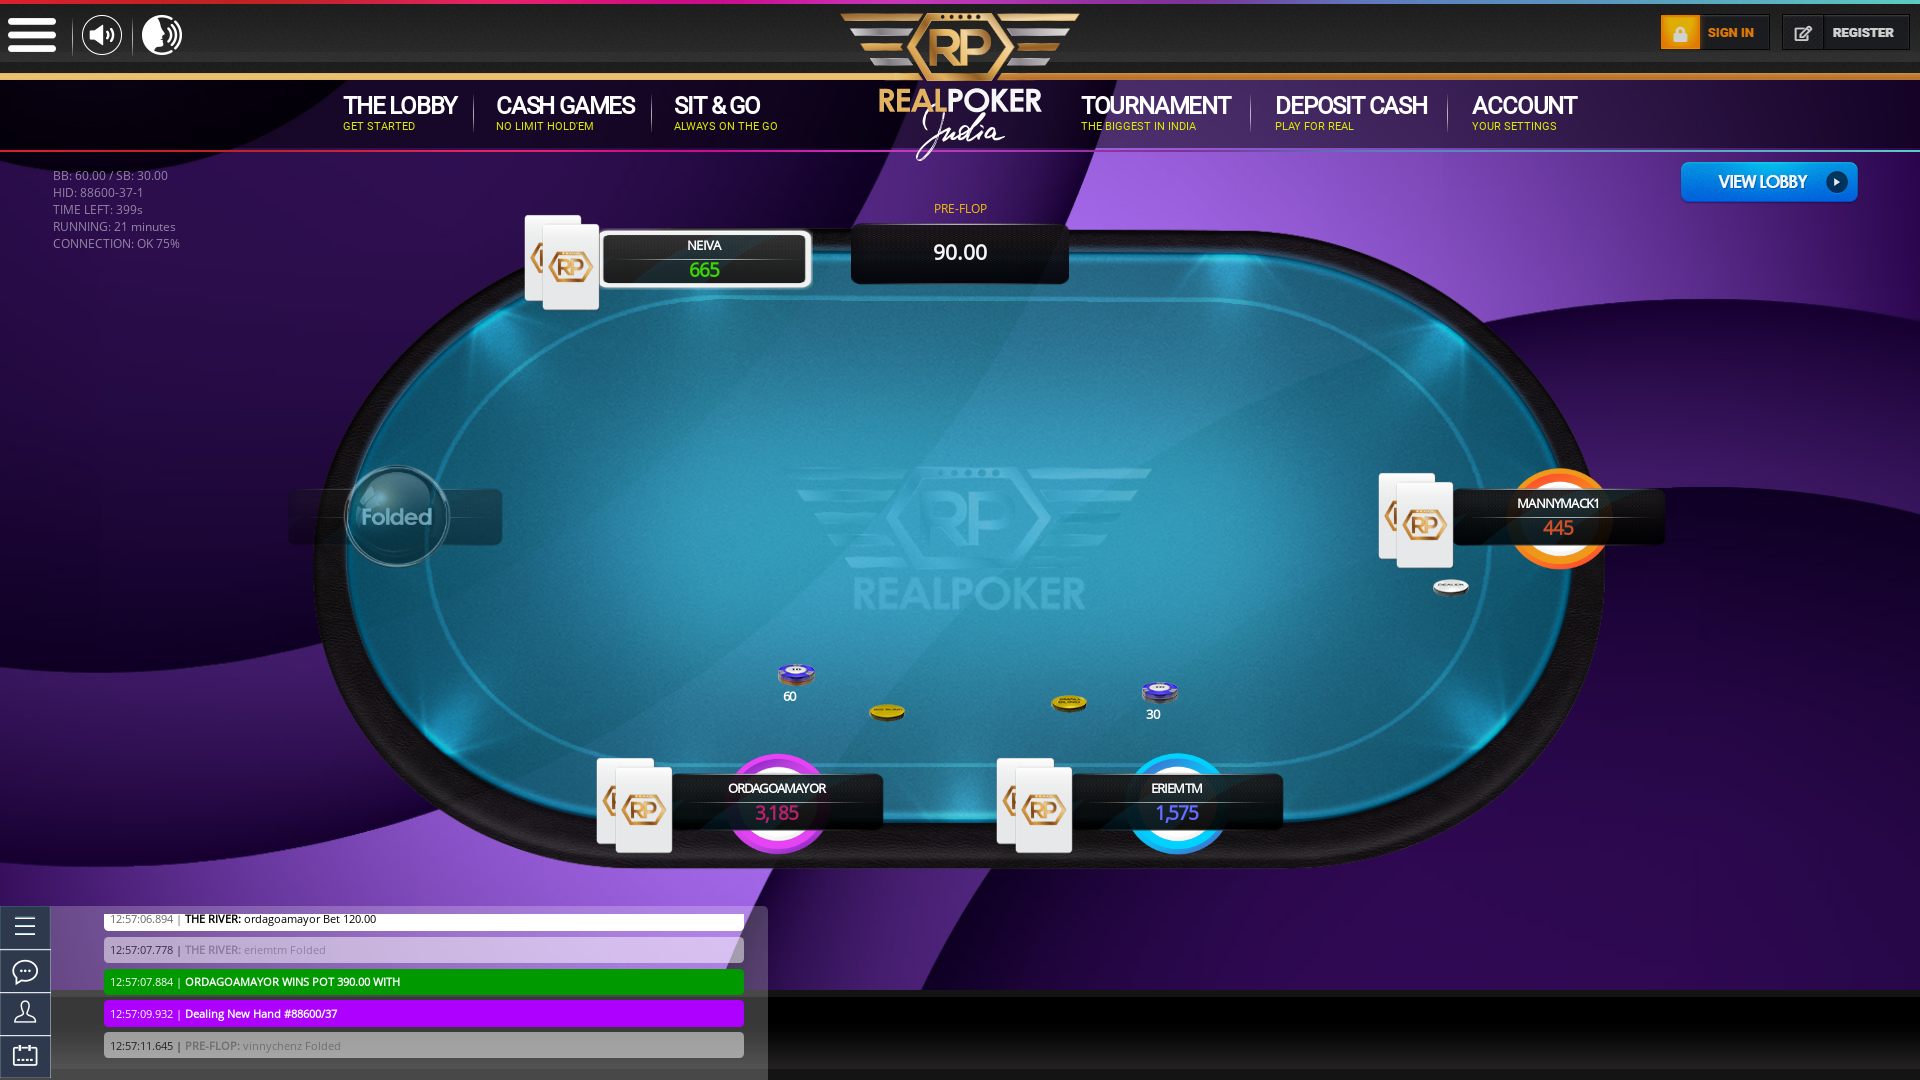 Real poker 6 player table in the 21st minute